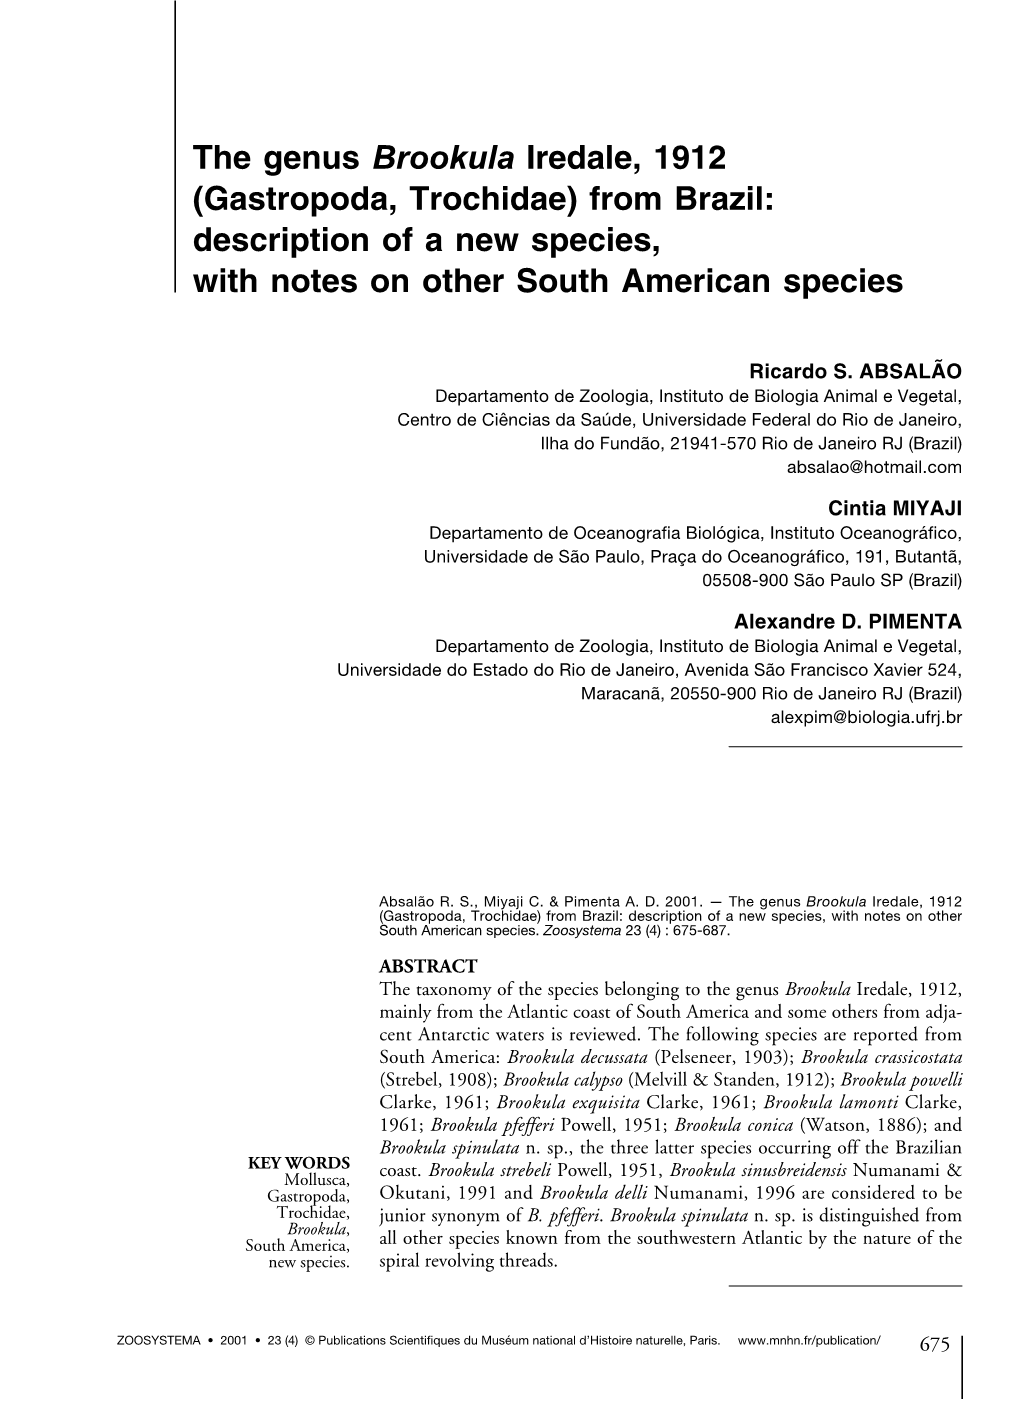 Gastropoda, Trochidae) from Brazil: Description of a New Species, with Notes on Other South American Species